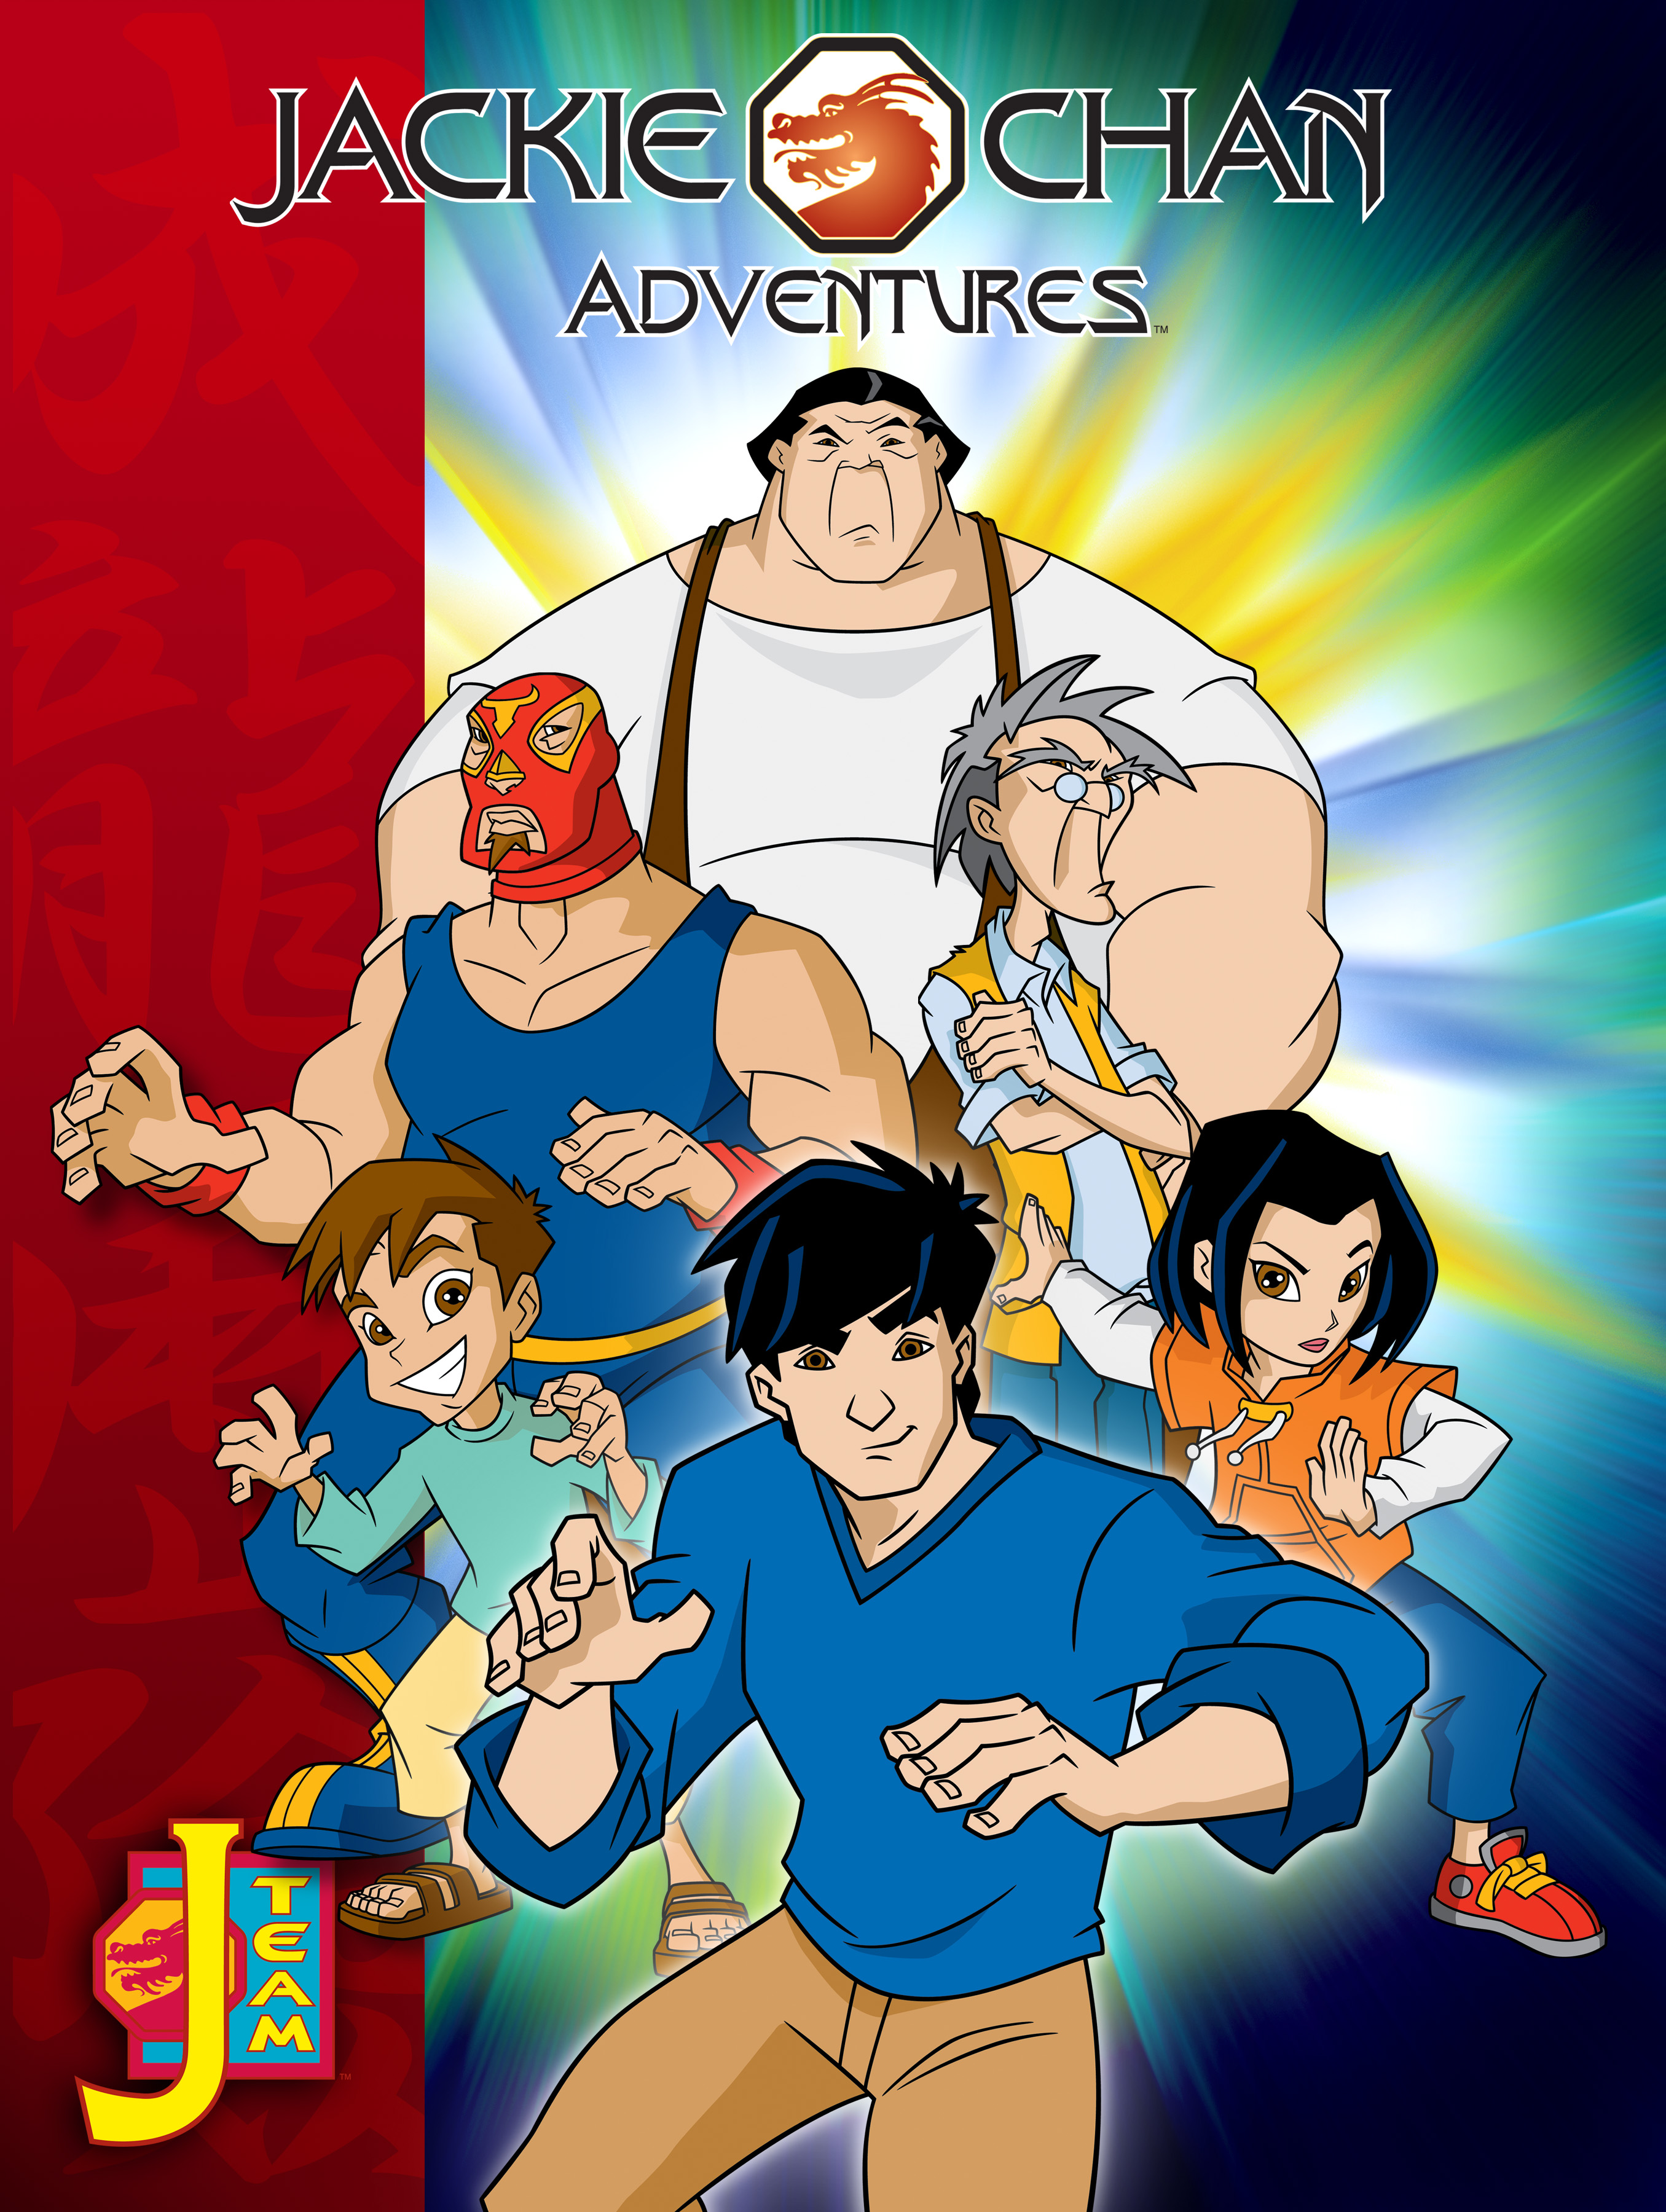 Where to watch jackie chan adventures